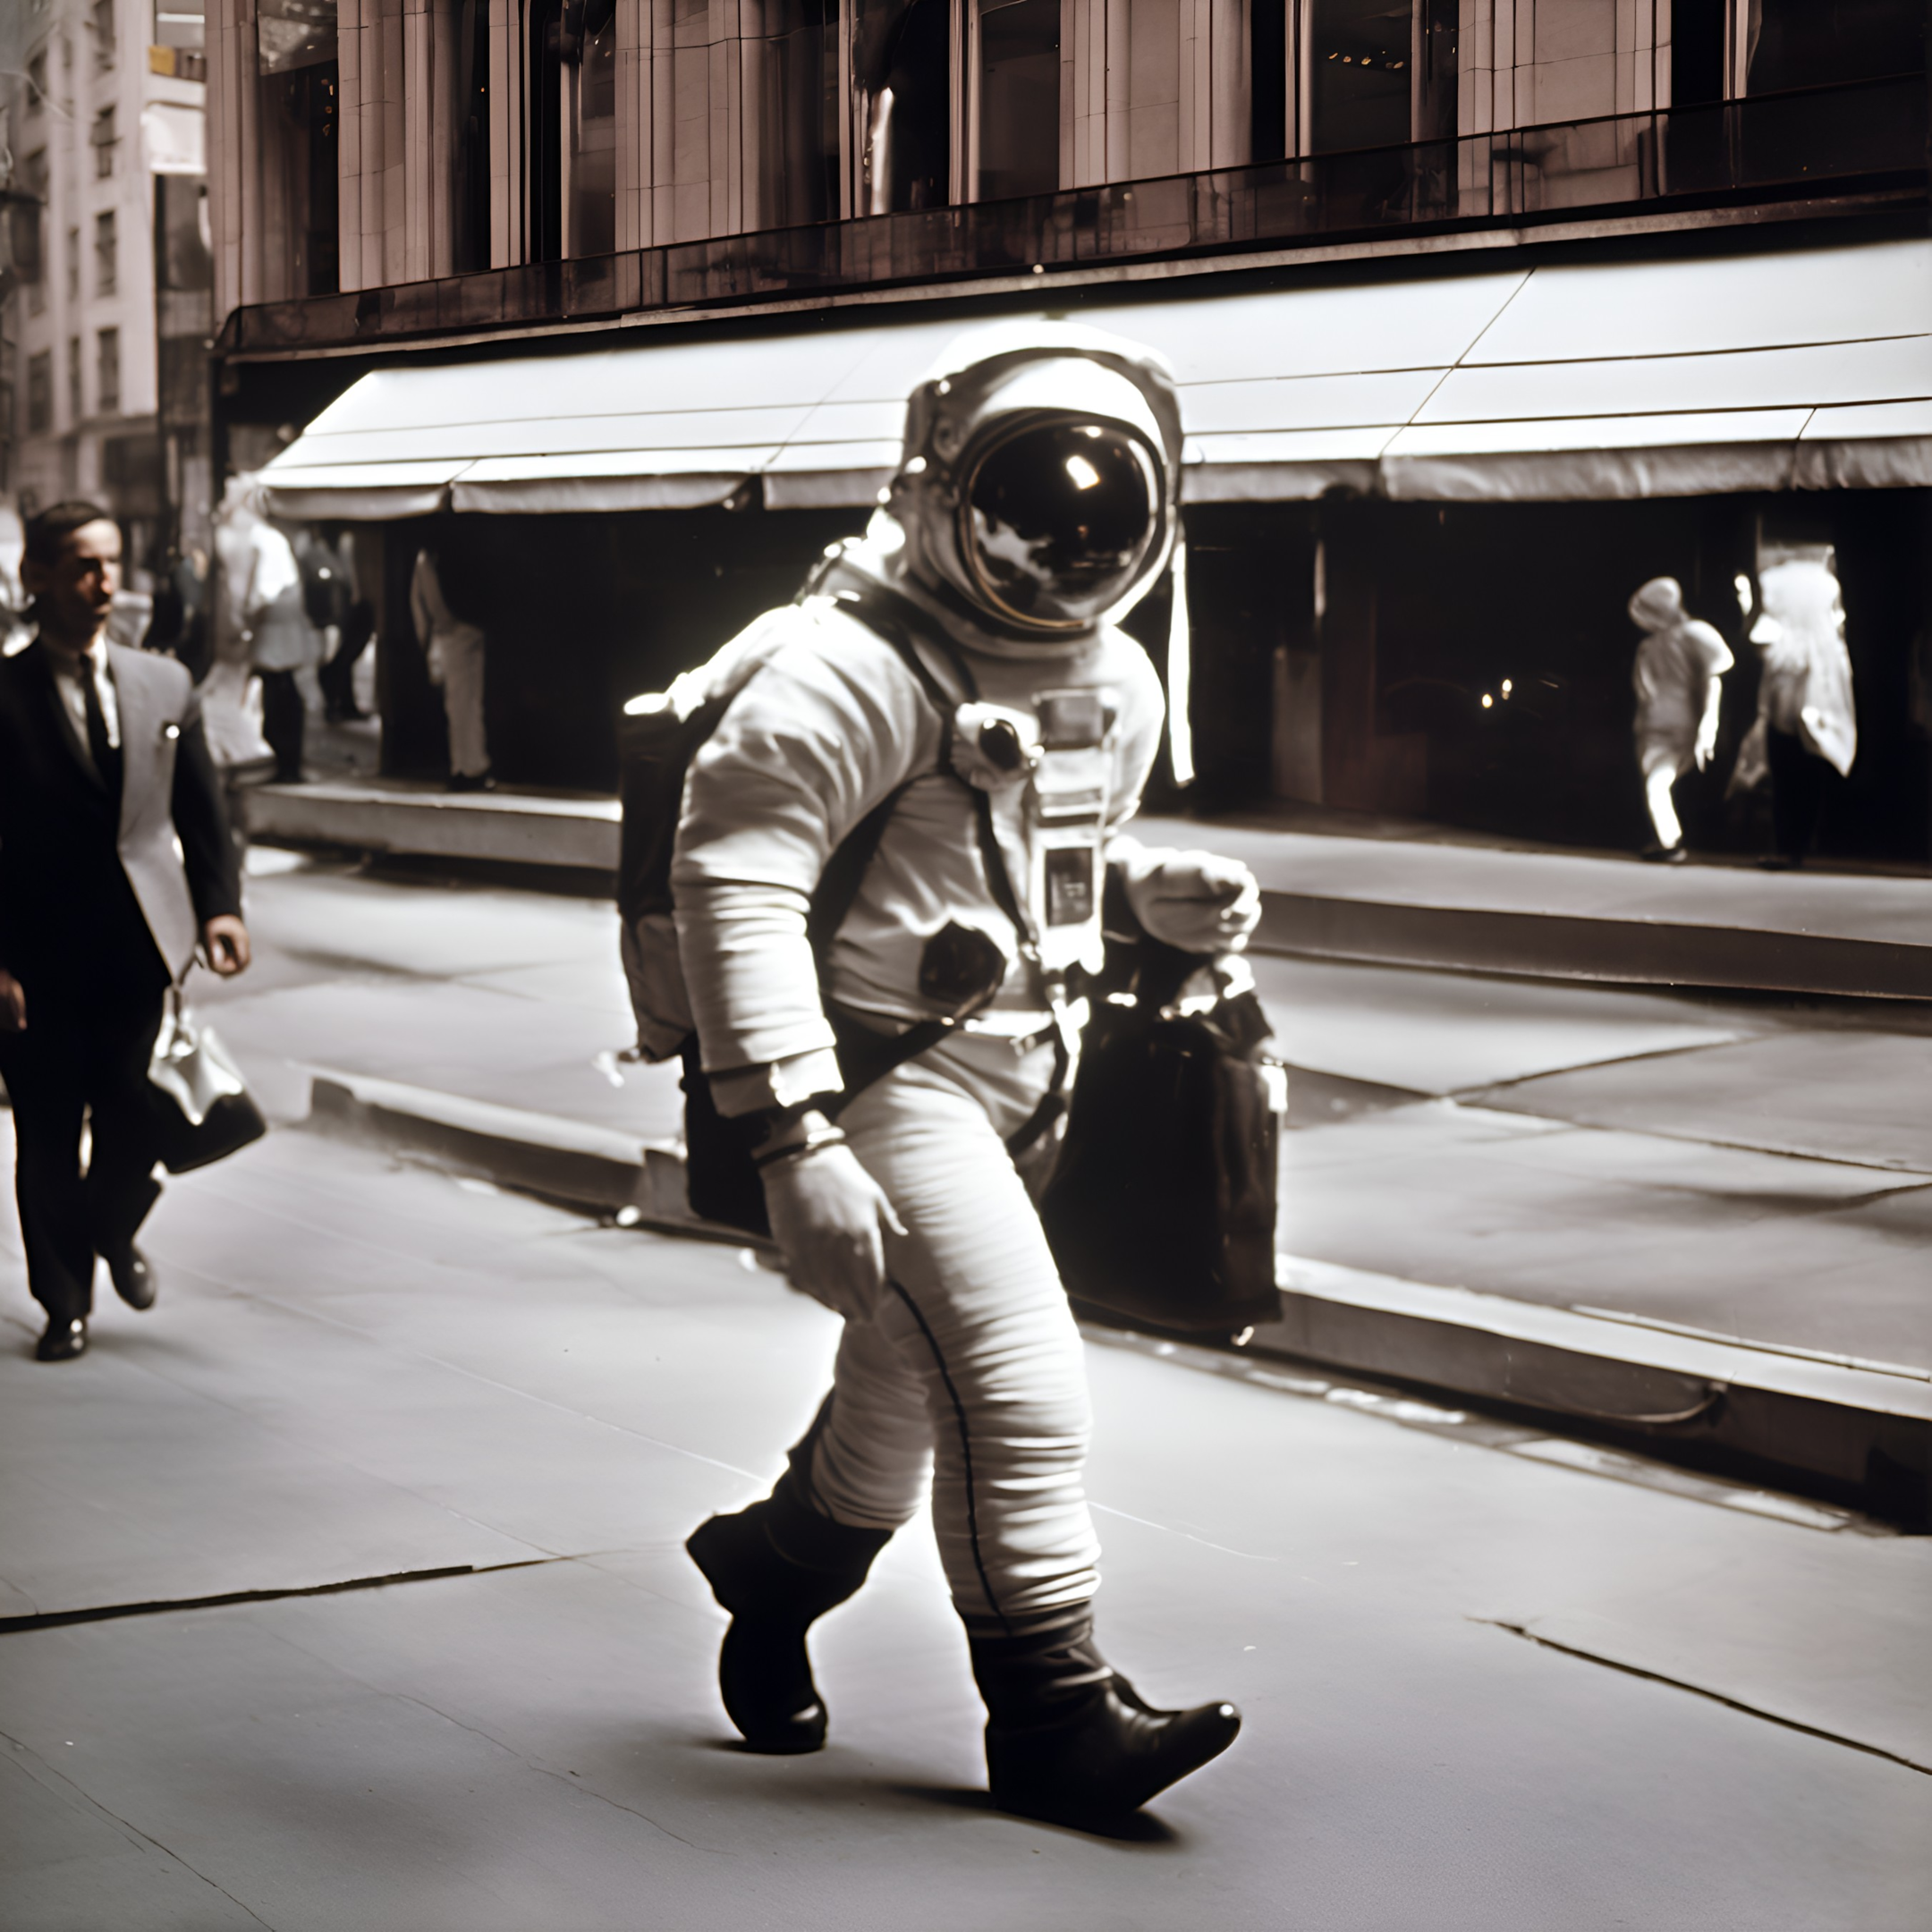 An astronaut in new york with a bag